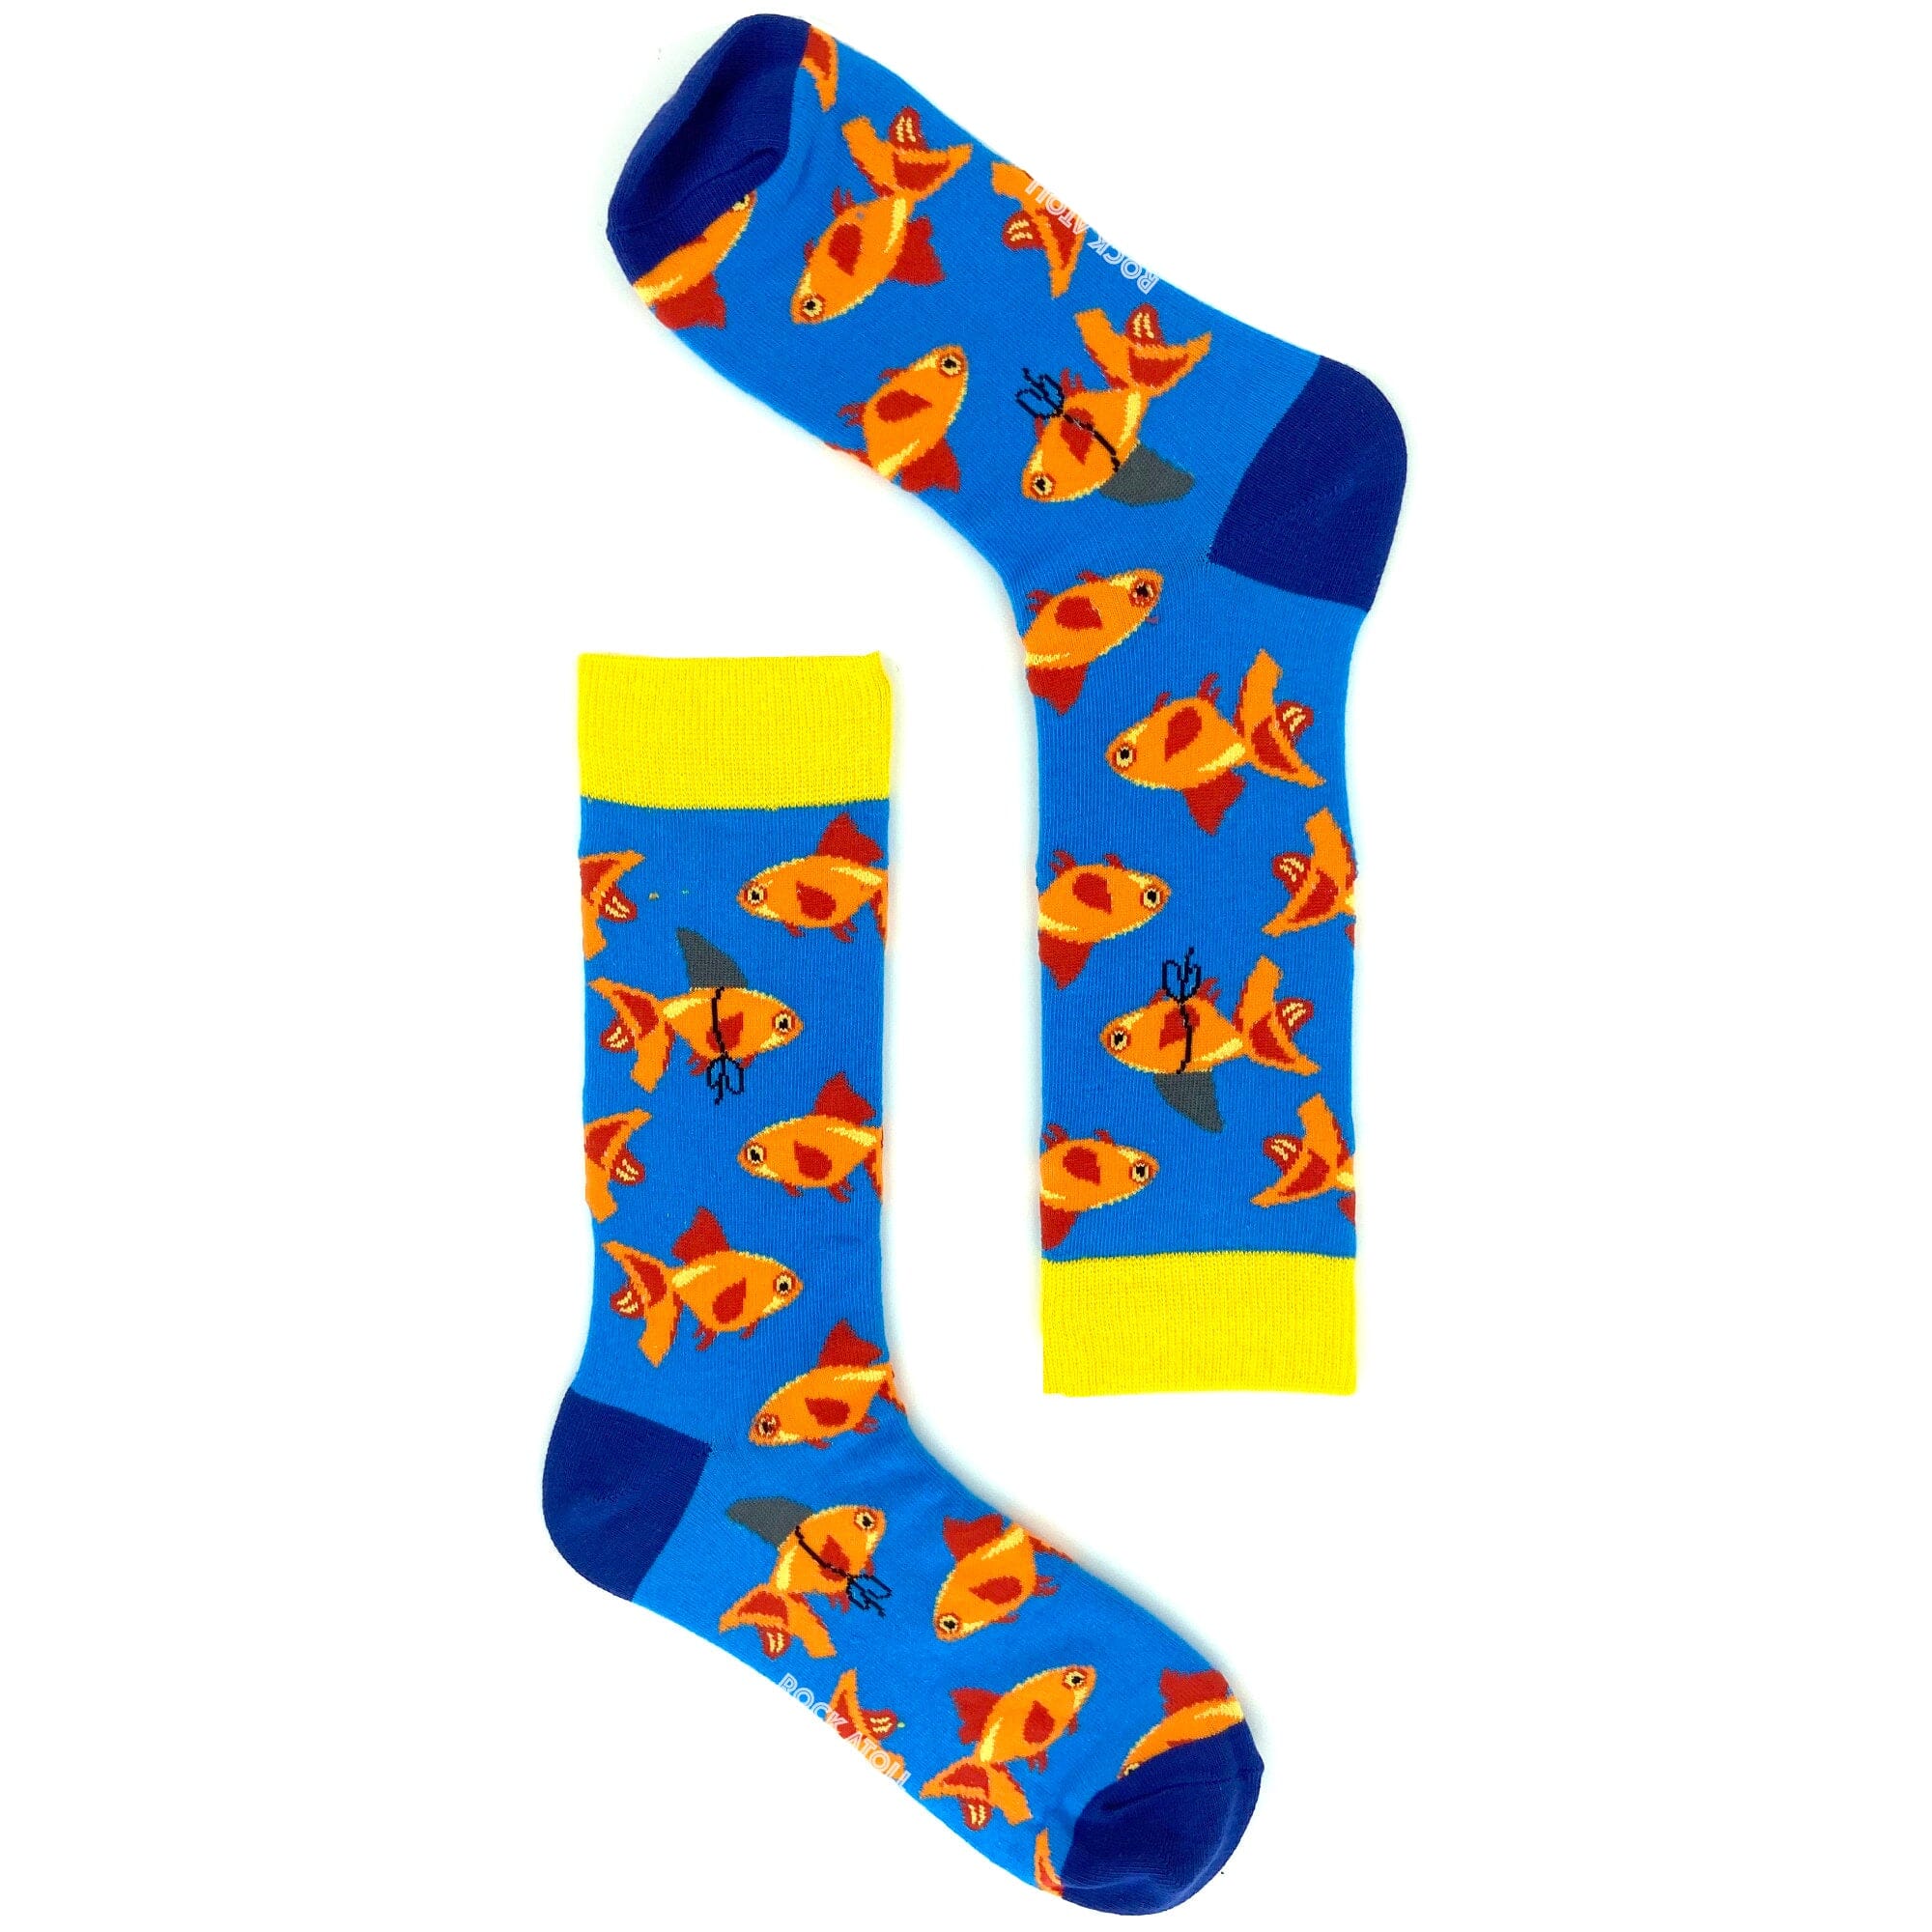 Funny Goldfish Undercover as Sharks Patterned Fun Novelty Crew Socks